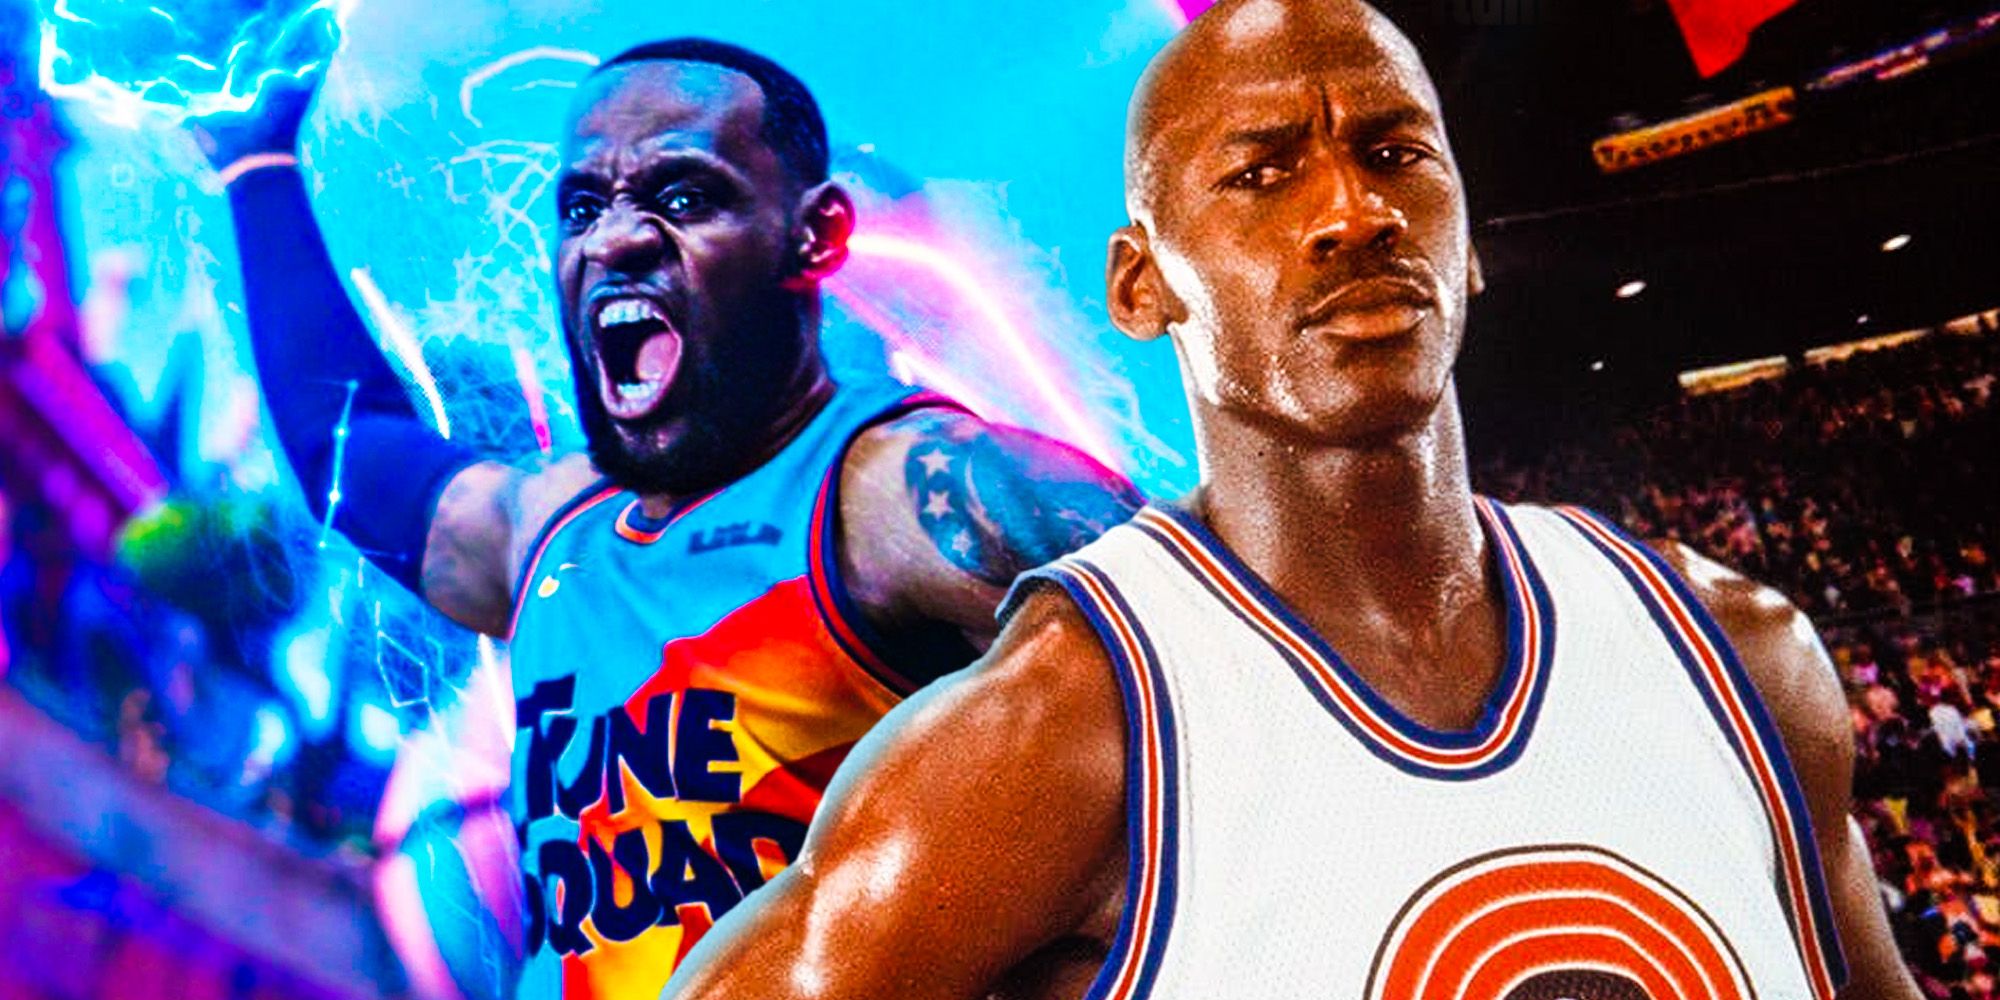 It turns out Space Jam is kind of visionary: Michael Jordan is